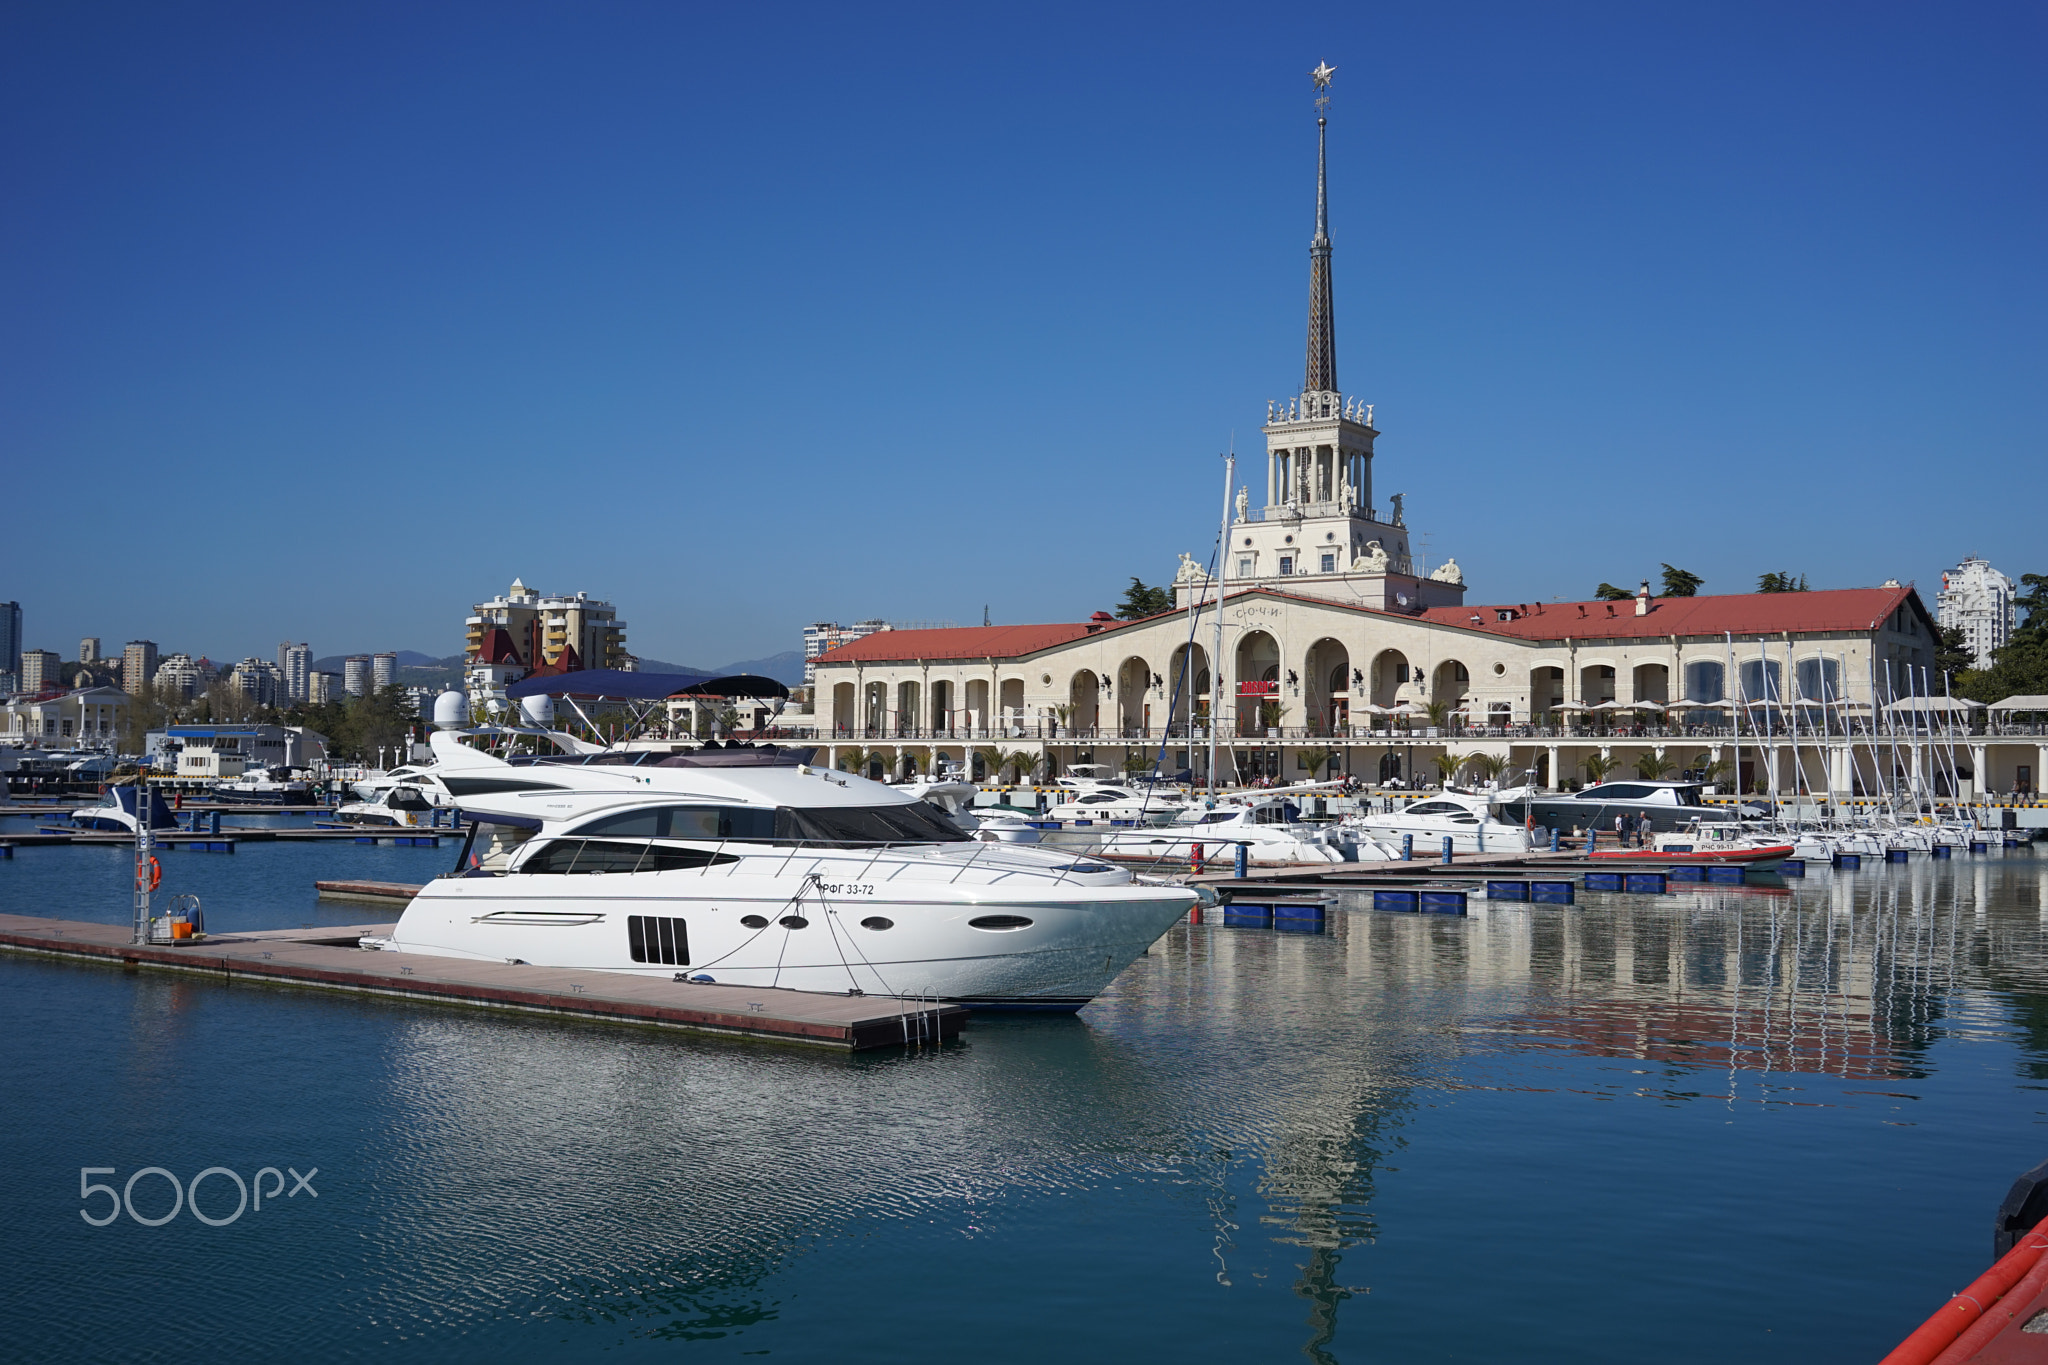 Beautiful yacht on the background of the sights of the resort city at the seaport.